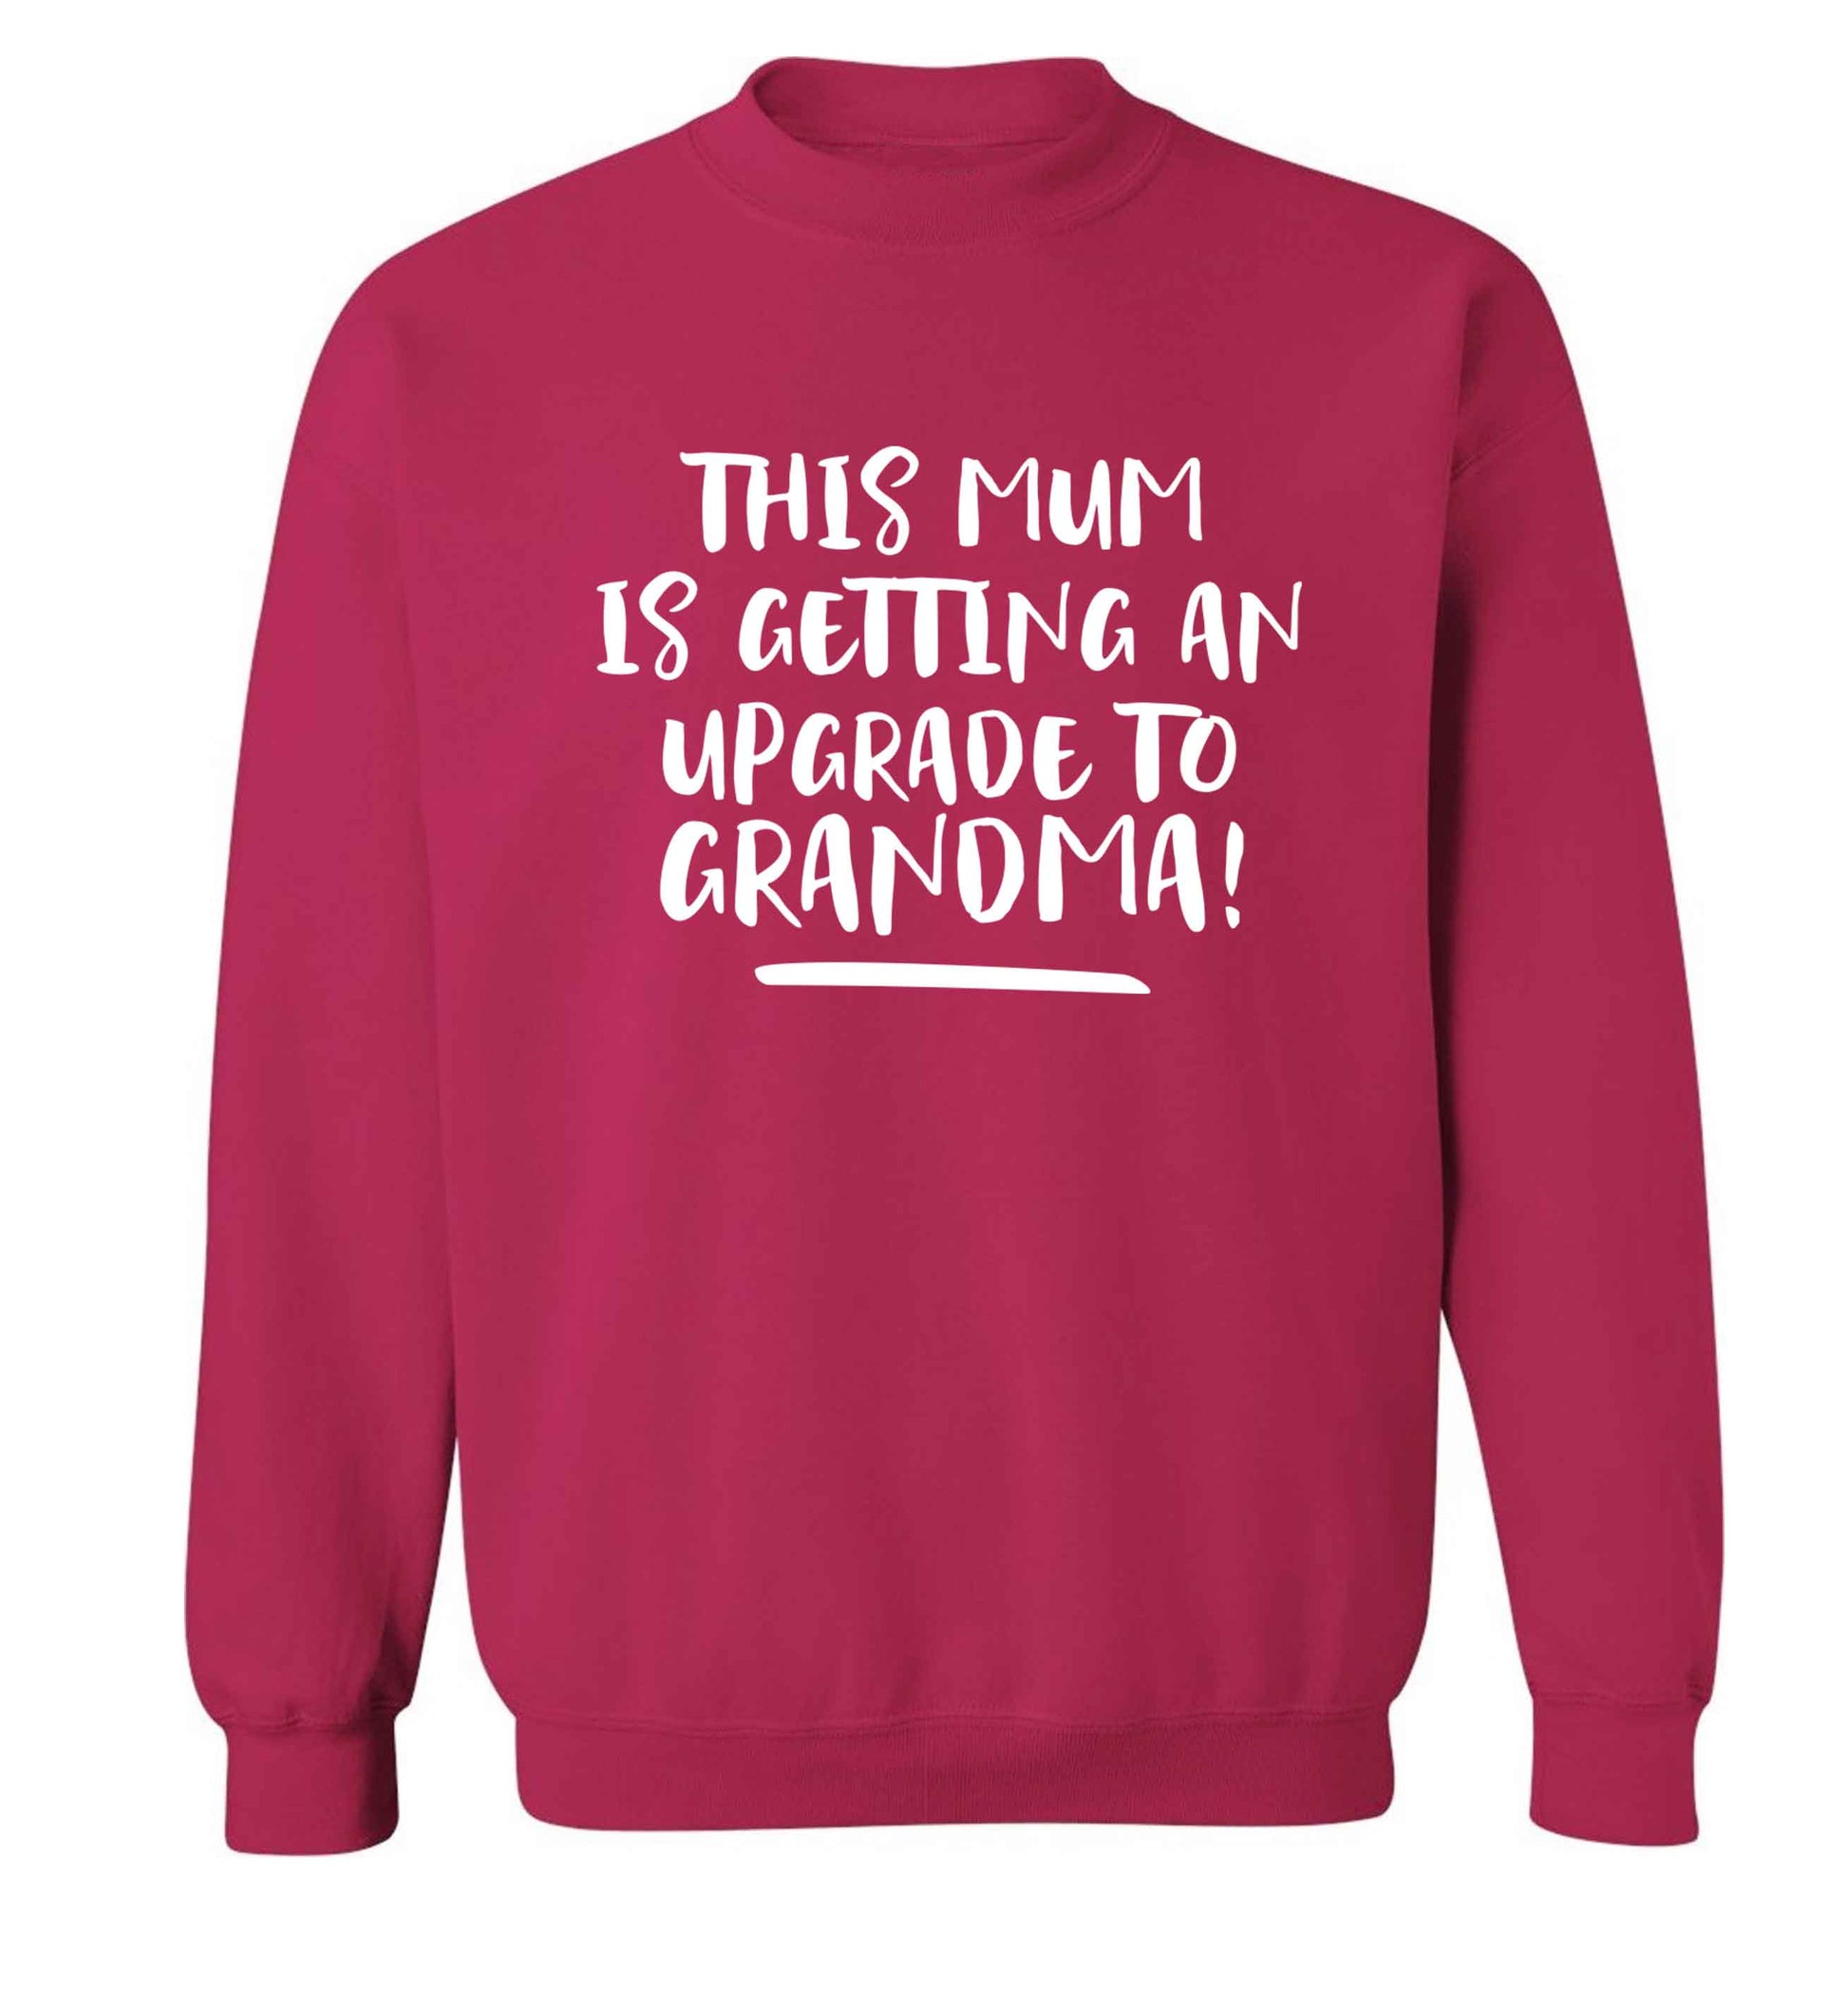 This mum is getting an upgrade to grandma! Adult's unisex pink Sweater 2XL